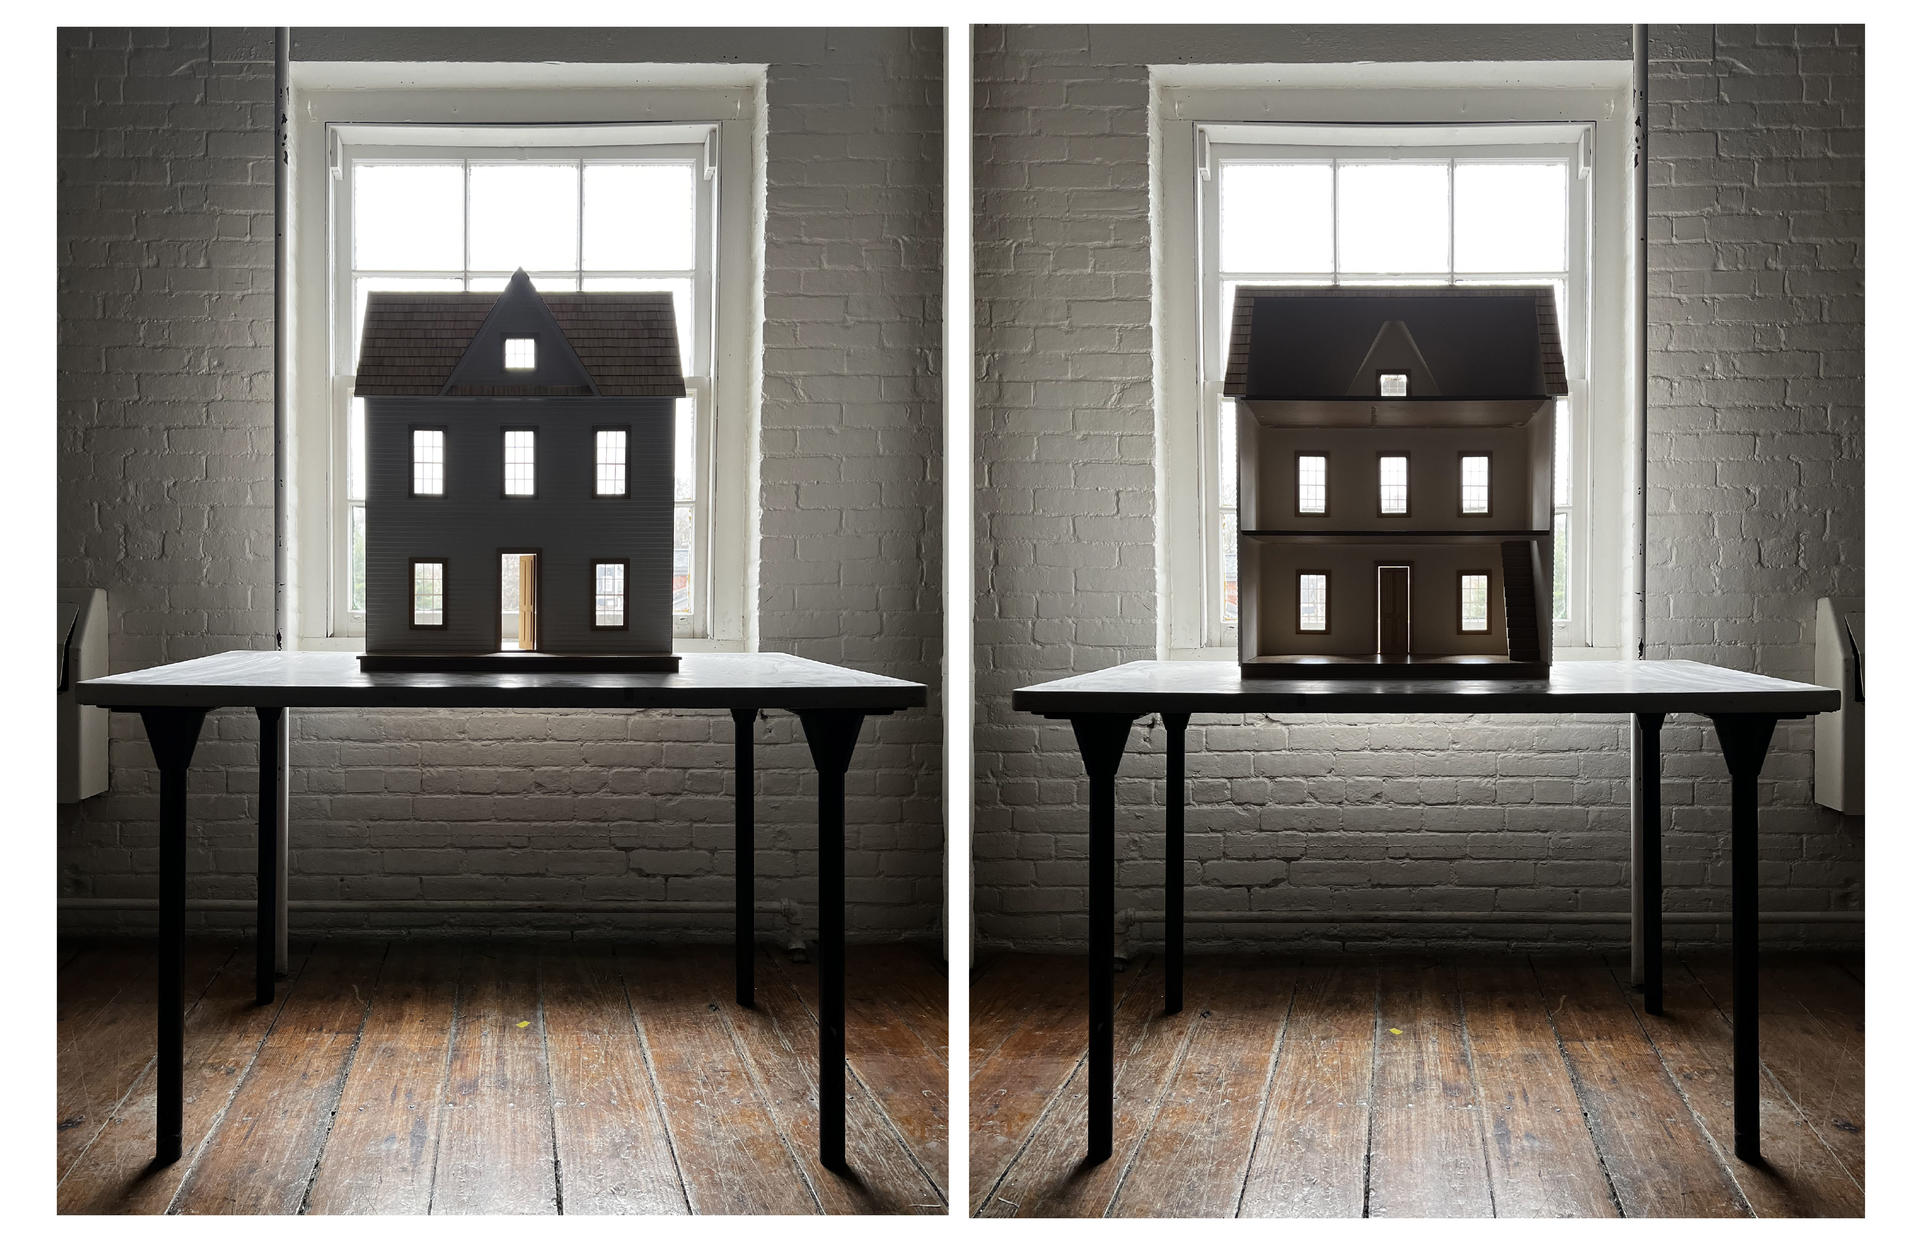 two images showing the inside / outside of a doll house